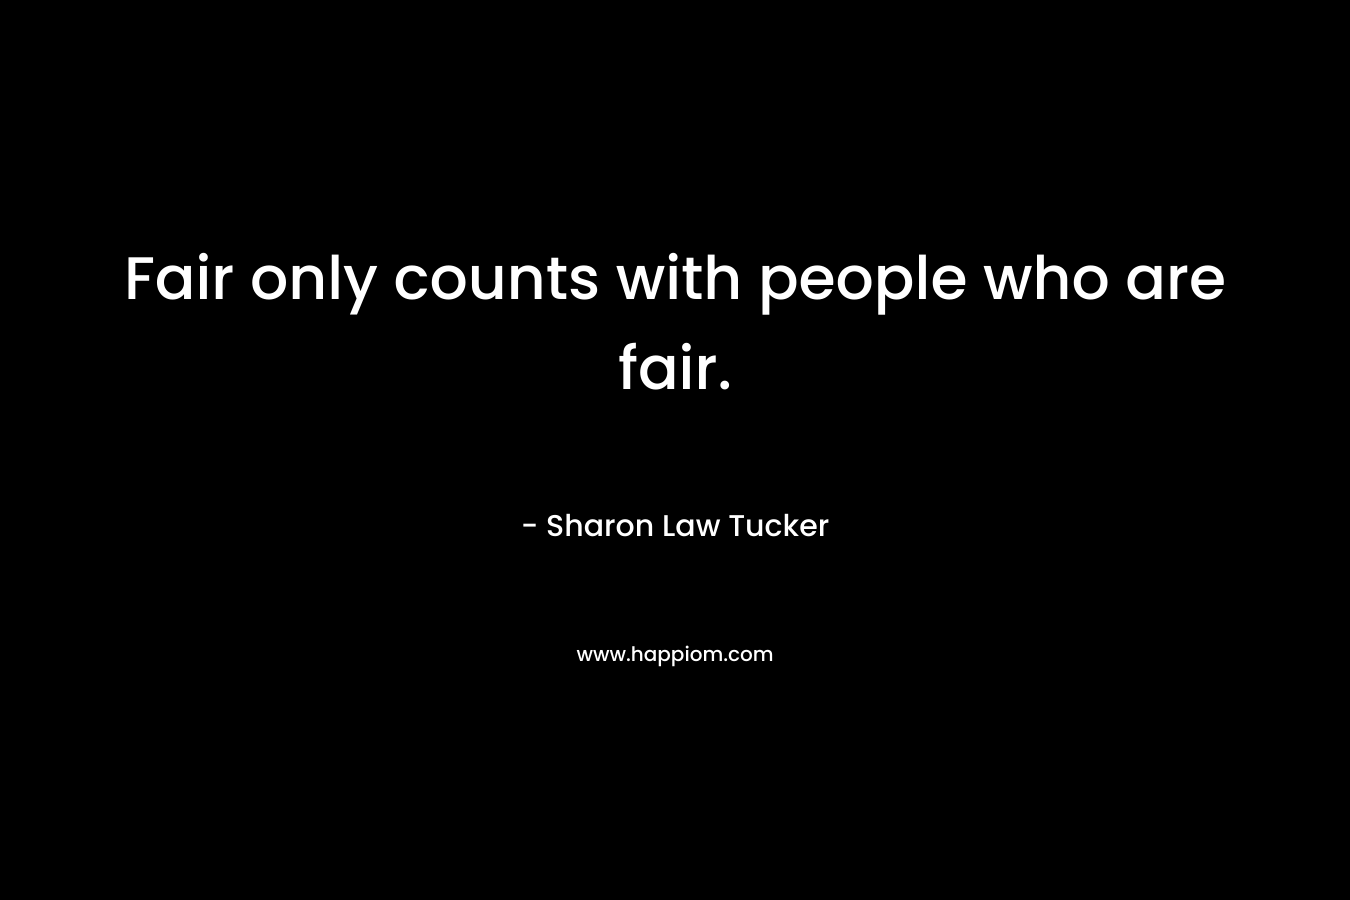 Fair only counts with people who are fair.